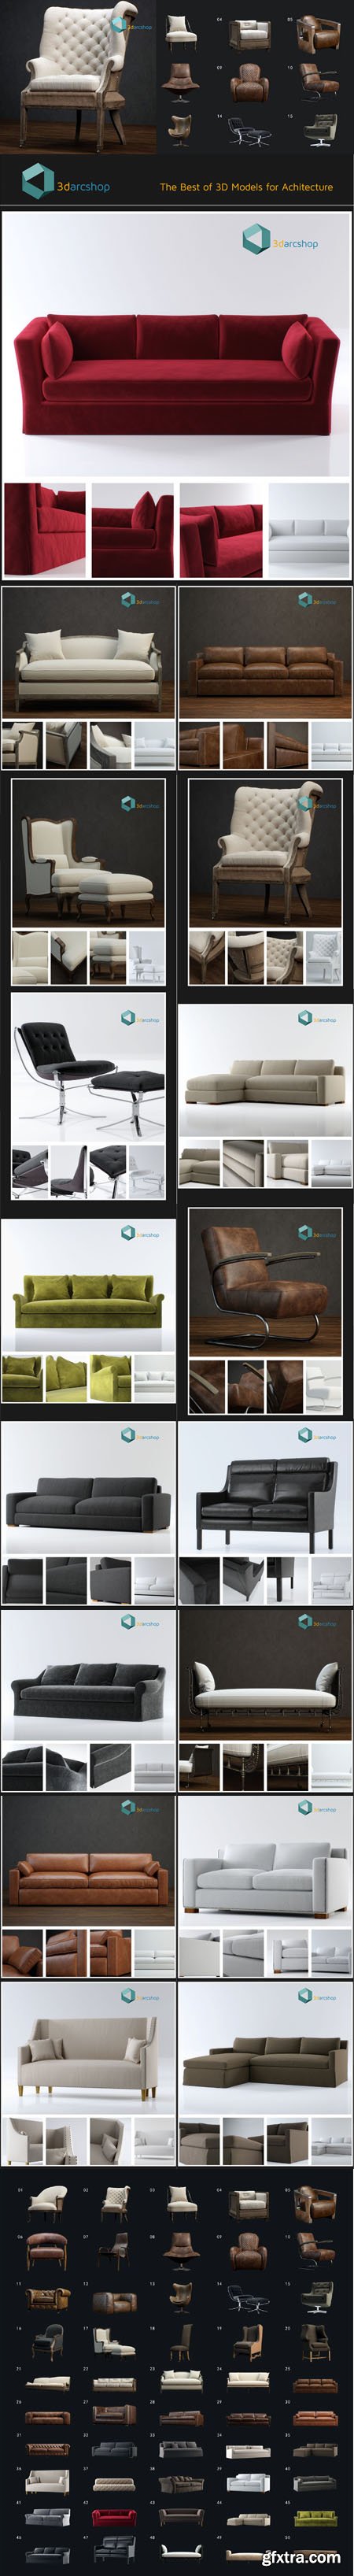 The Best of 3D Models for Architecture (Armchairs & Sofas)